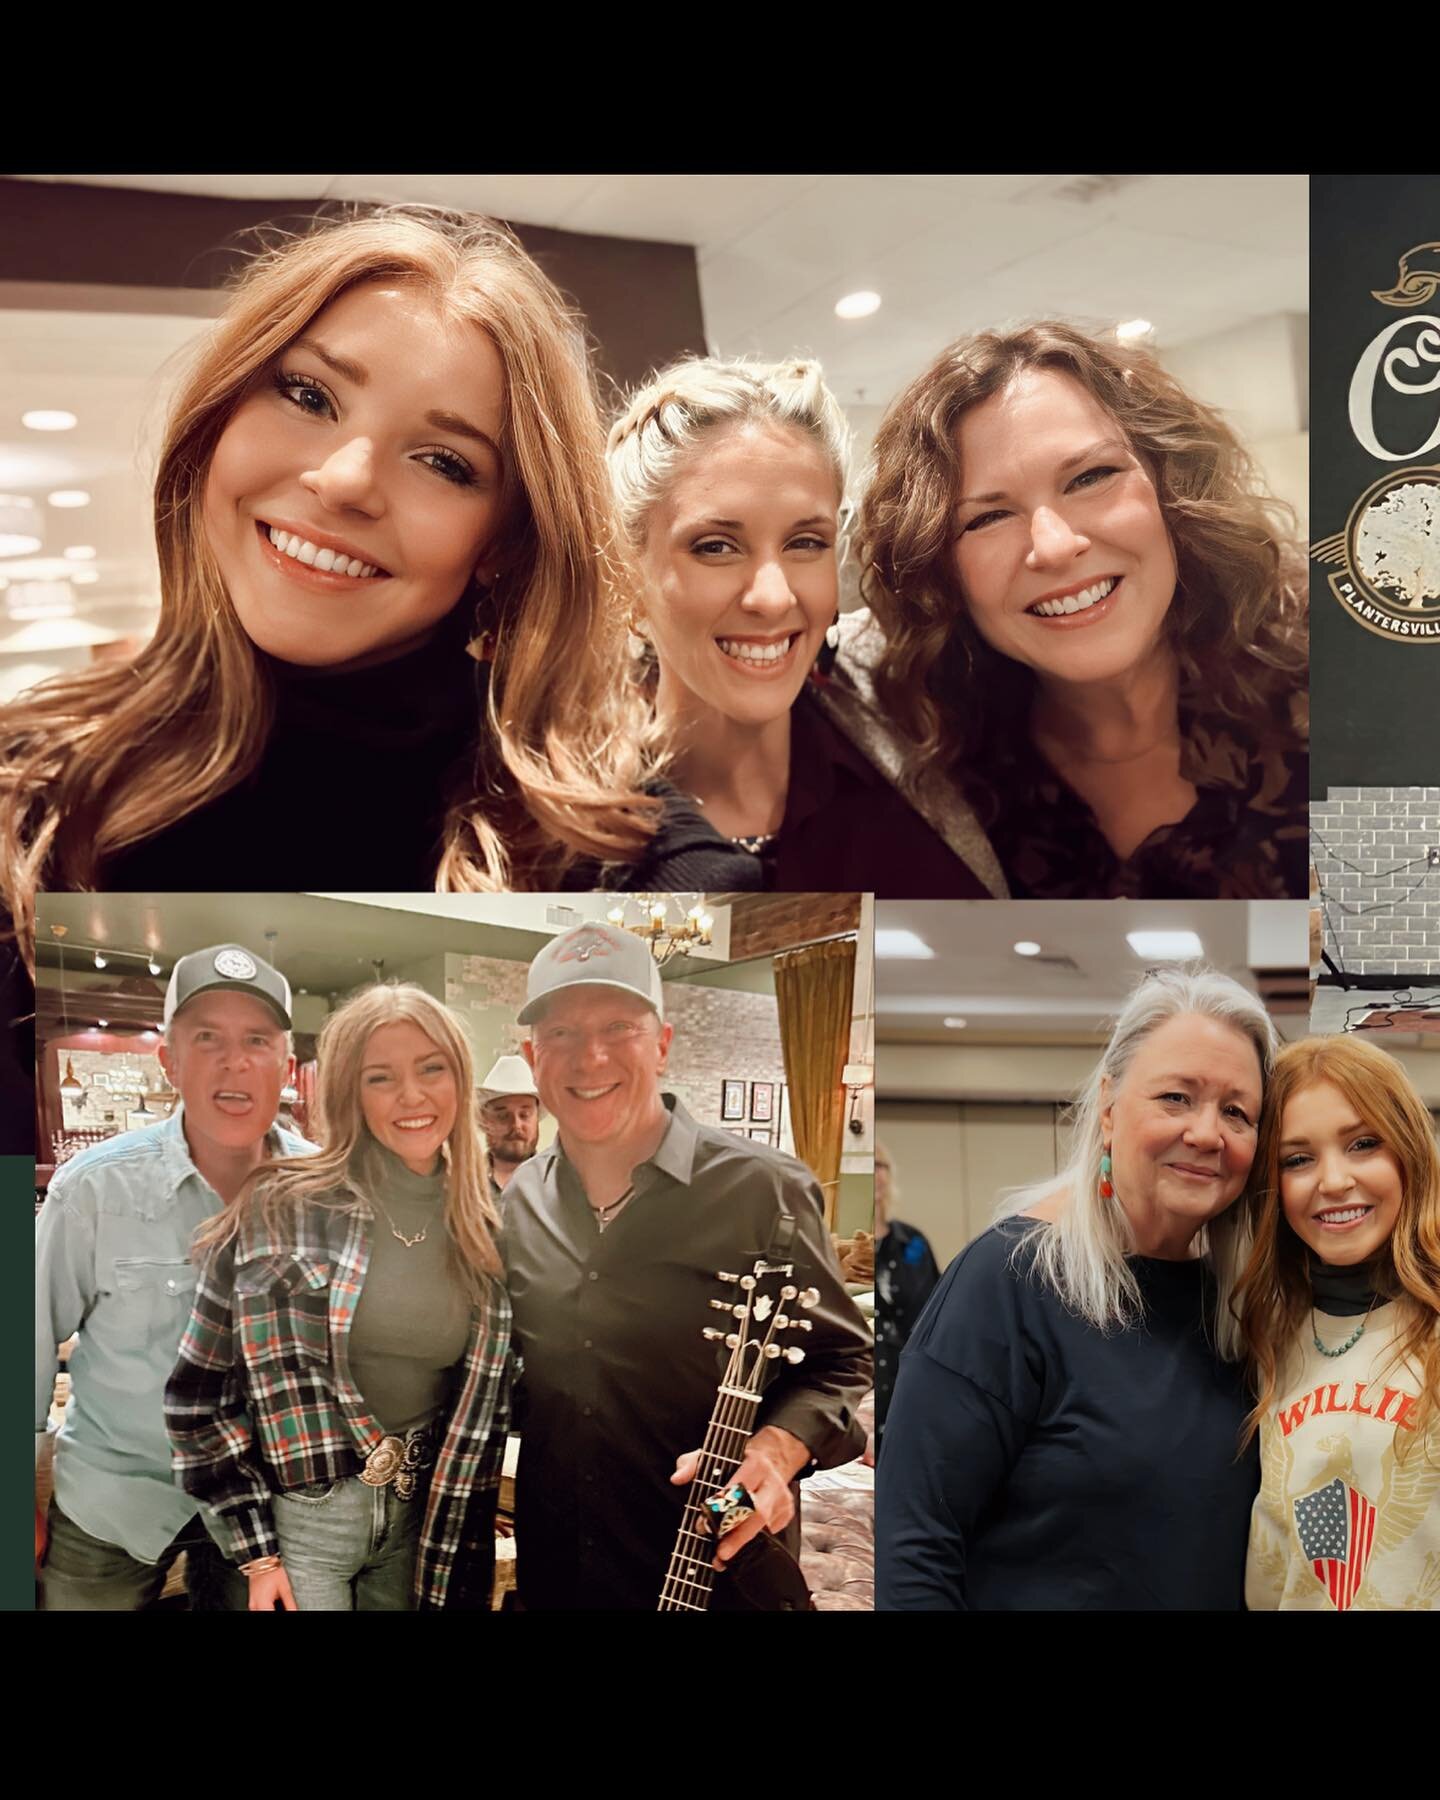 Good timin&rsquo; goin on!❣️

- Was blessed to meet some amazing people, starting with @corymorrowband and @kylehuttonmusic at @thestellahotel! 
- Then had the opportunity to attend @asgsongwriters where I got to learn, play, take it all in, and have